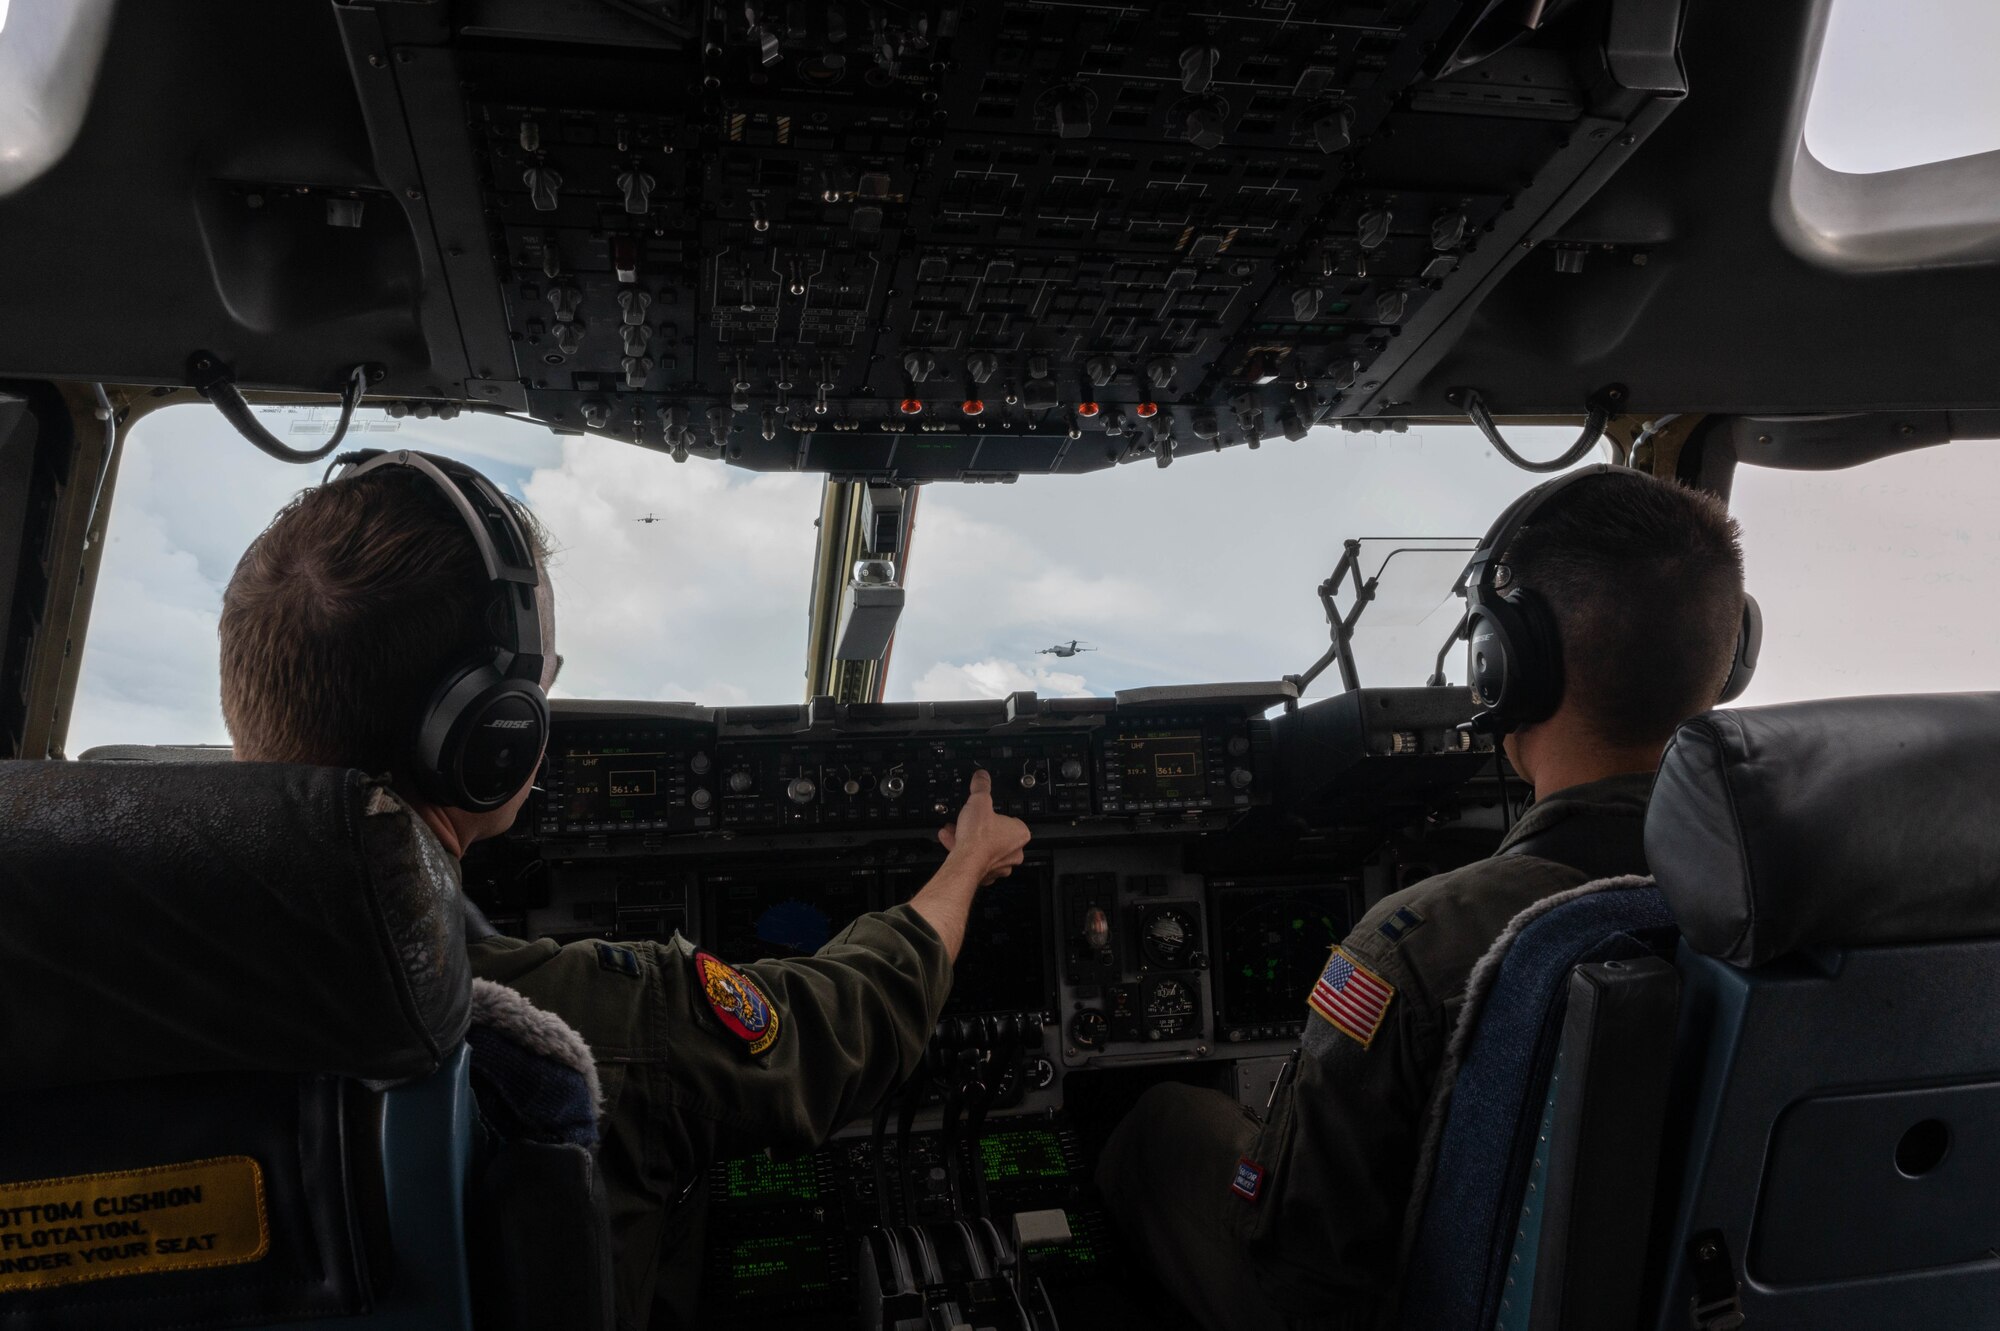 Capt. Alec Nelson, 535th Airlift Squadron C-17A Globemaster III aircraft commander, and Capt. Ken Nakanishi, 535th AS C-17 pilot, participate in a three-ship formation with Royal Australian Air Force C-17s during a training exercise over the West Pacific, Nov. 14, 2021. The United States and Australia provide security throughout the Indo-Pacific region by enhancing their mission effectiveness through integrated cooperation. (U.S. Air Force photo by Staff Sgt. Alan Ricker)